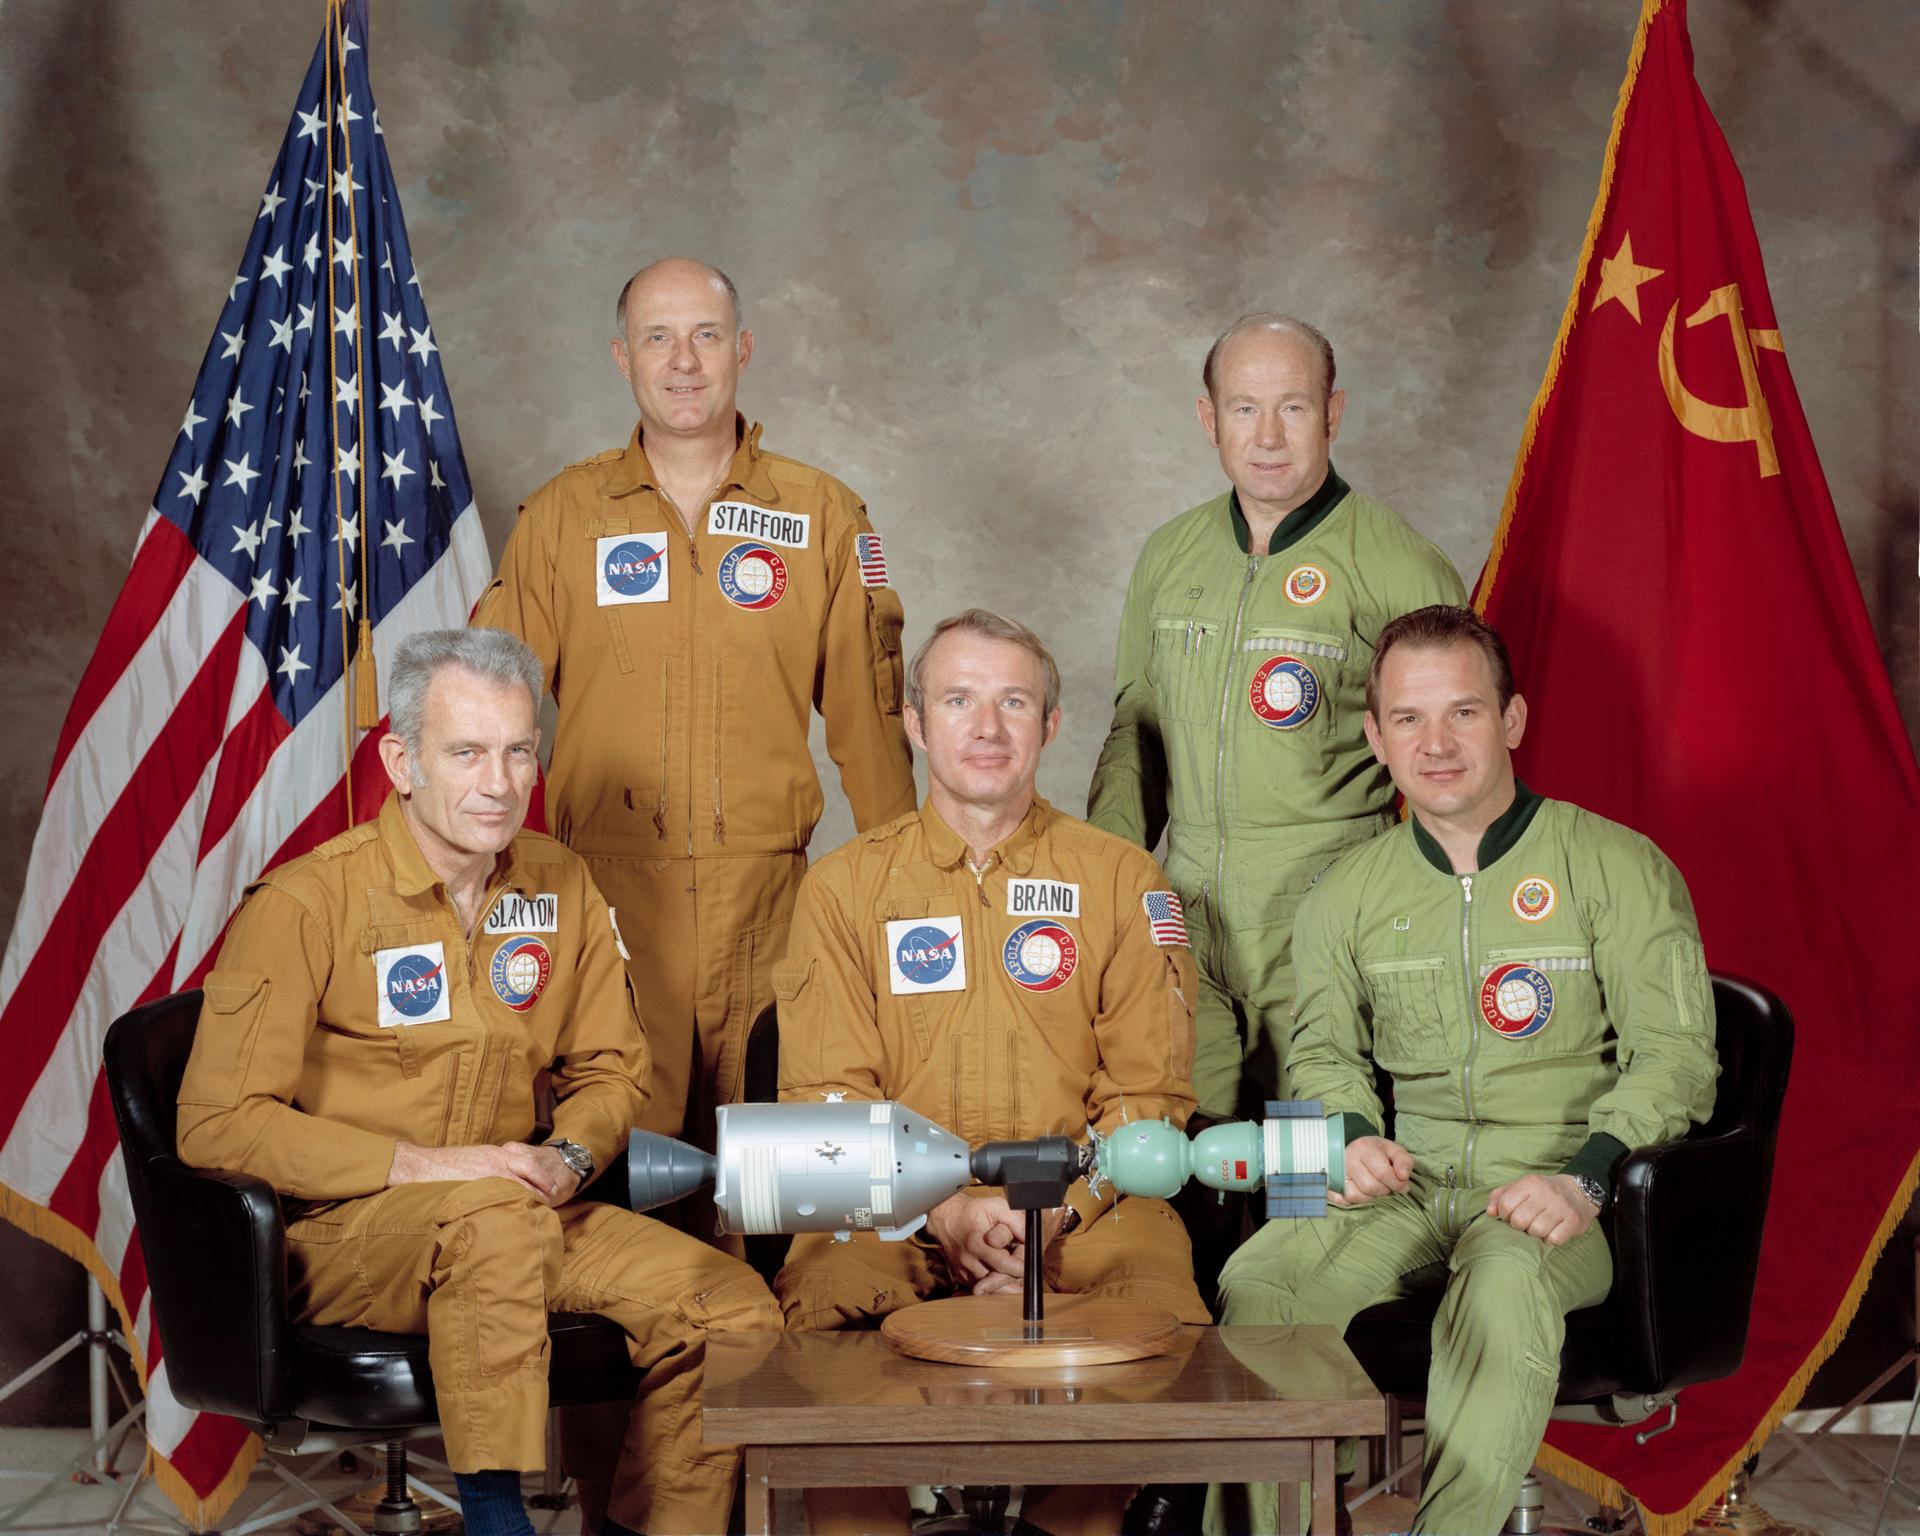 portrait of five men (3 American, 2 Soviet) who make up the two prime crews of the 1975 Apollo-Soyuz mission